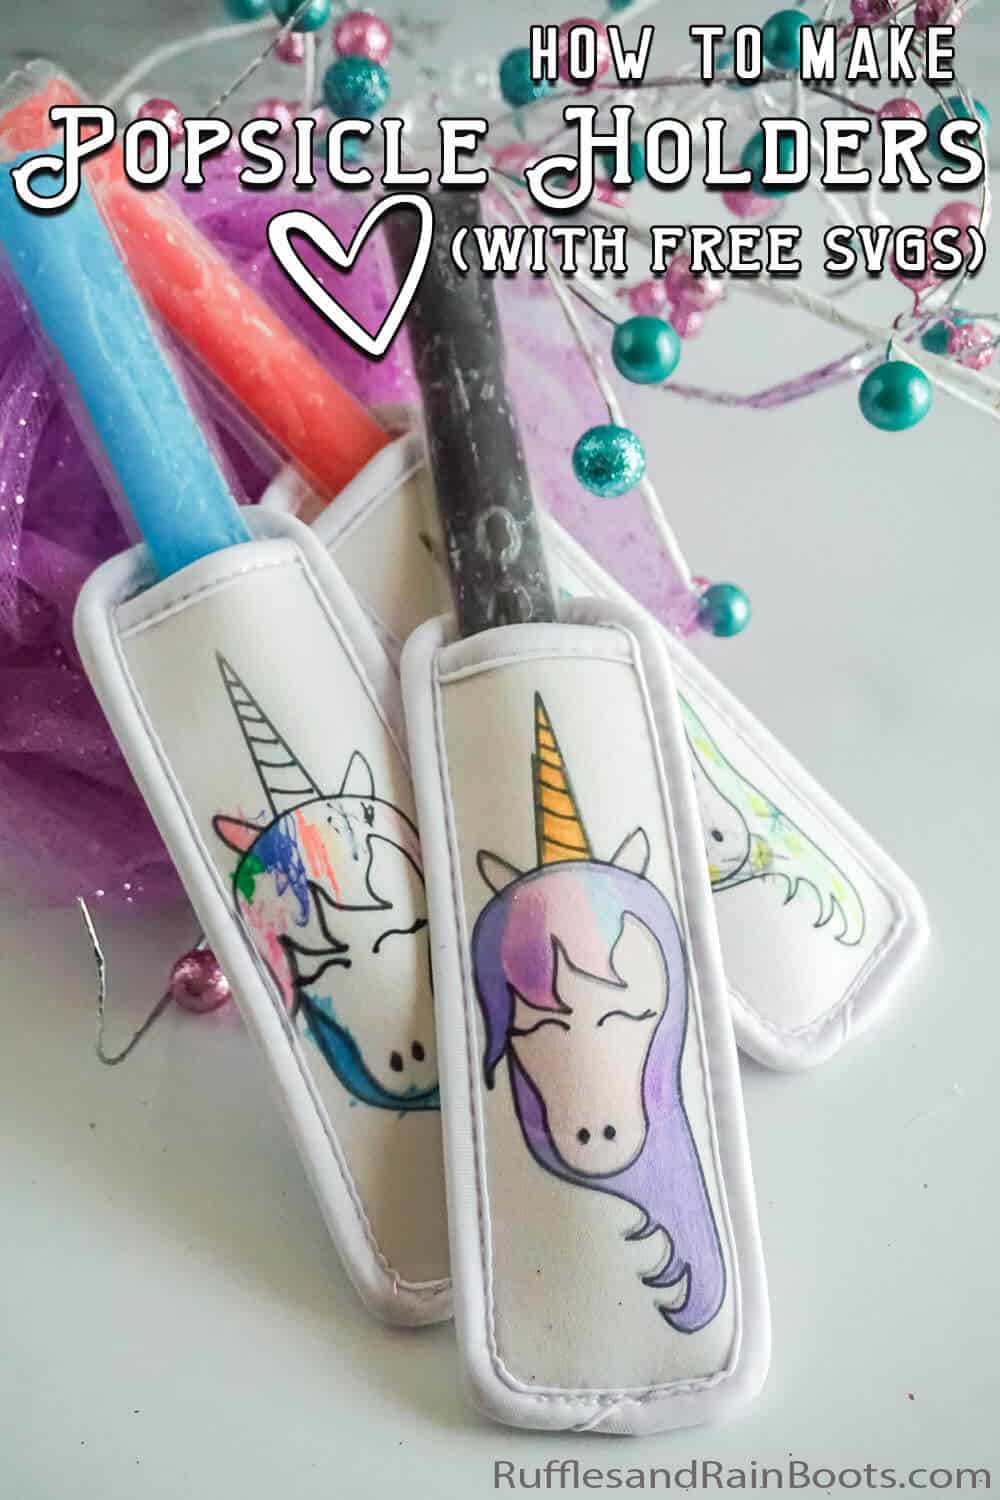 easy unicorn craft for summer personalized popsicle cover with text which reads how to make popsicle holders (with free svgs)